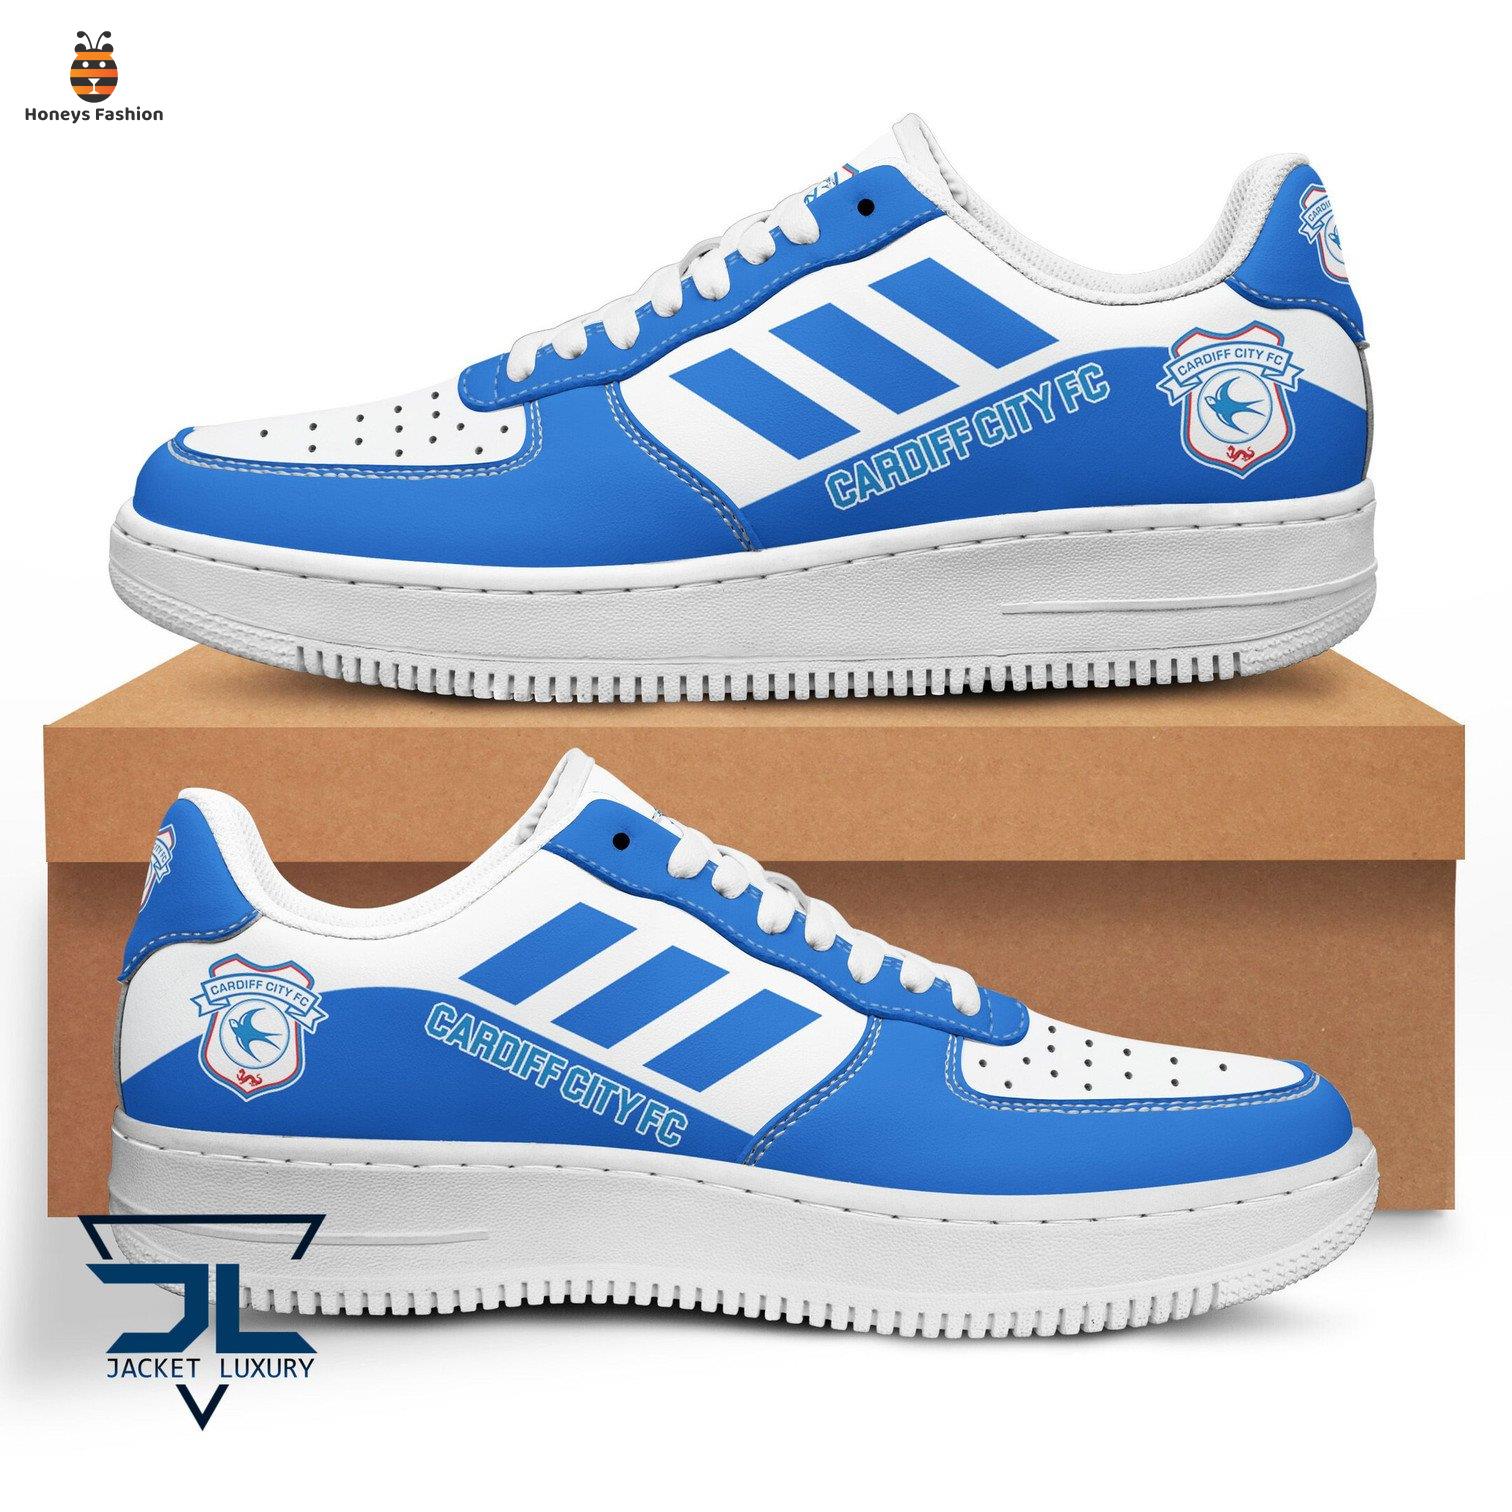 Cardiff City F.C air force 1 shoes